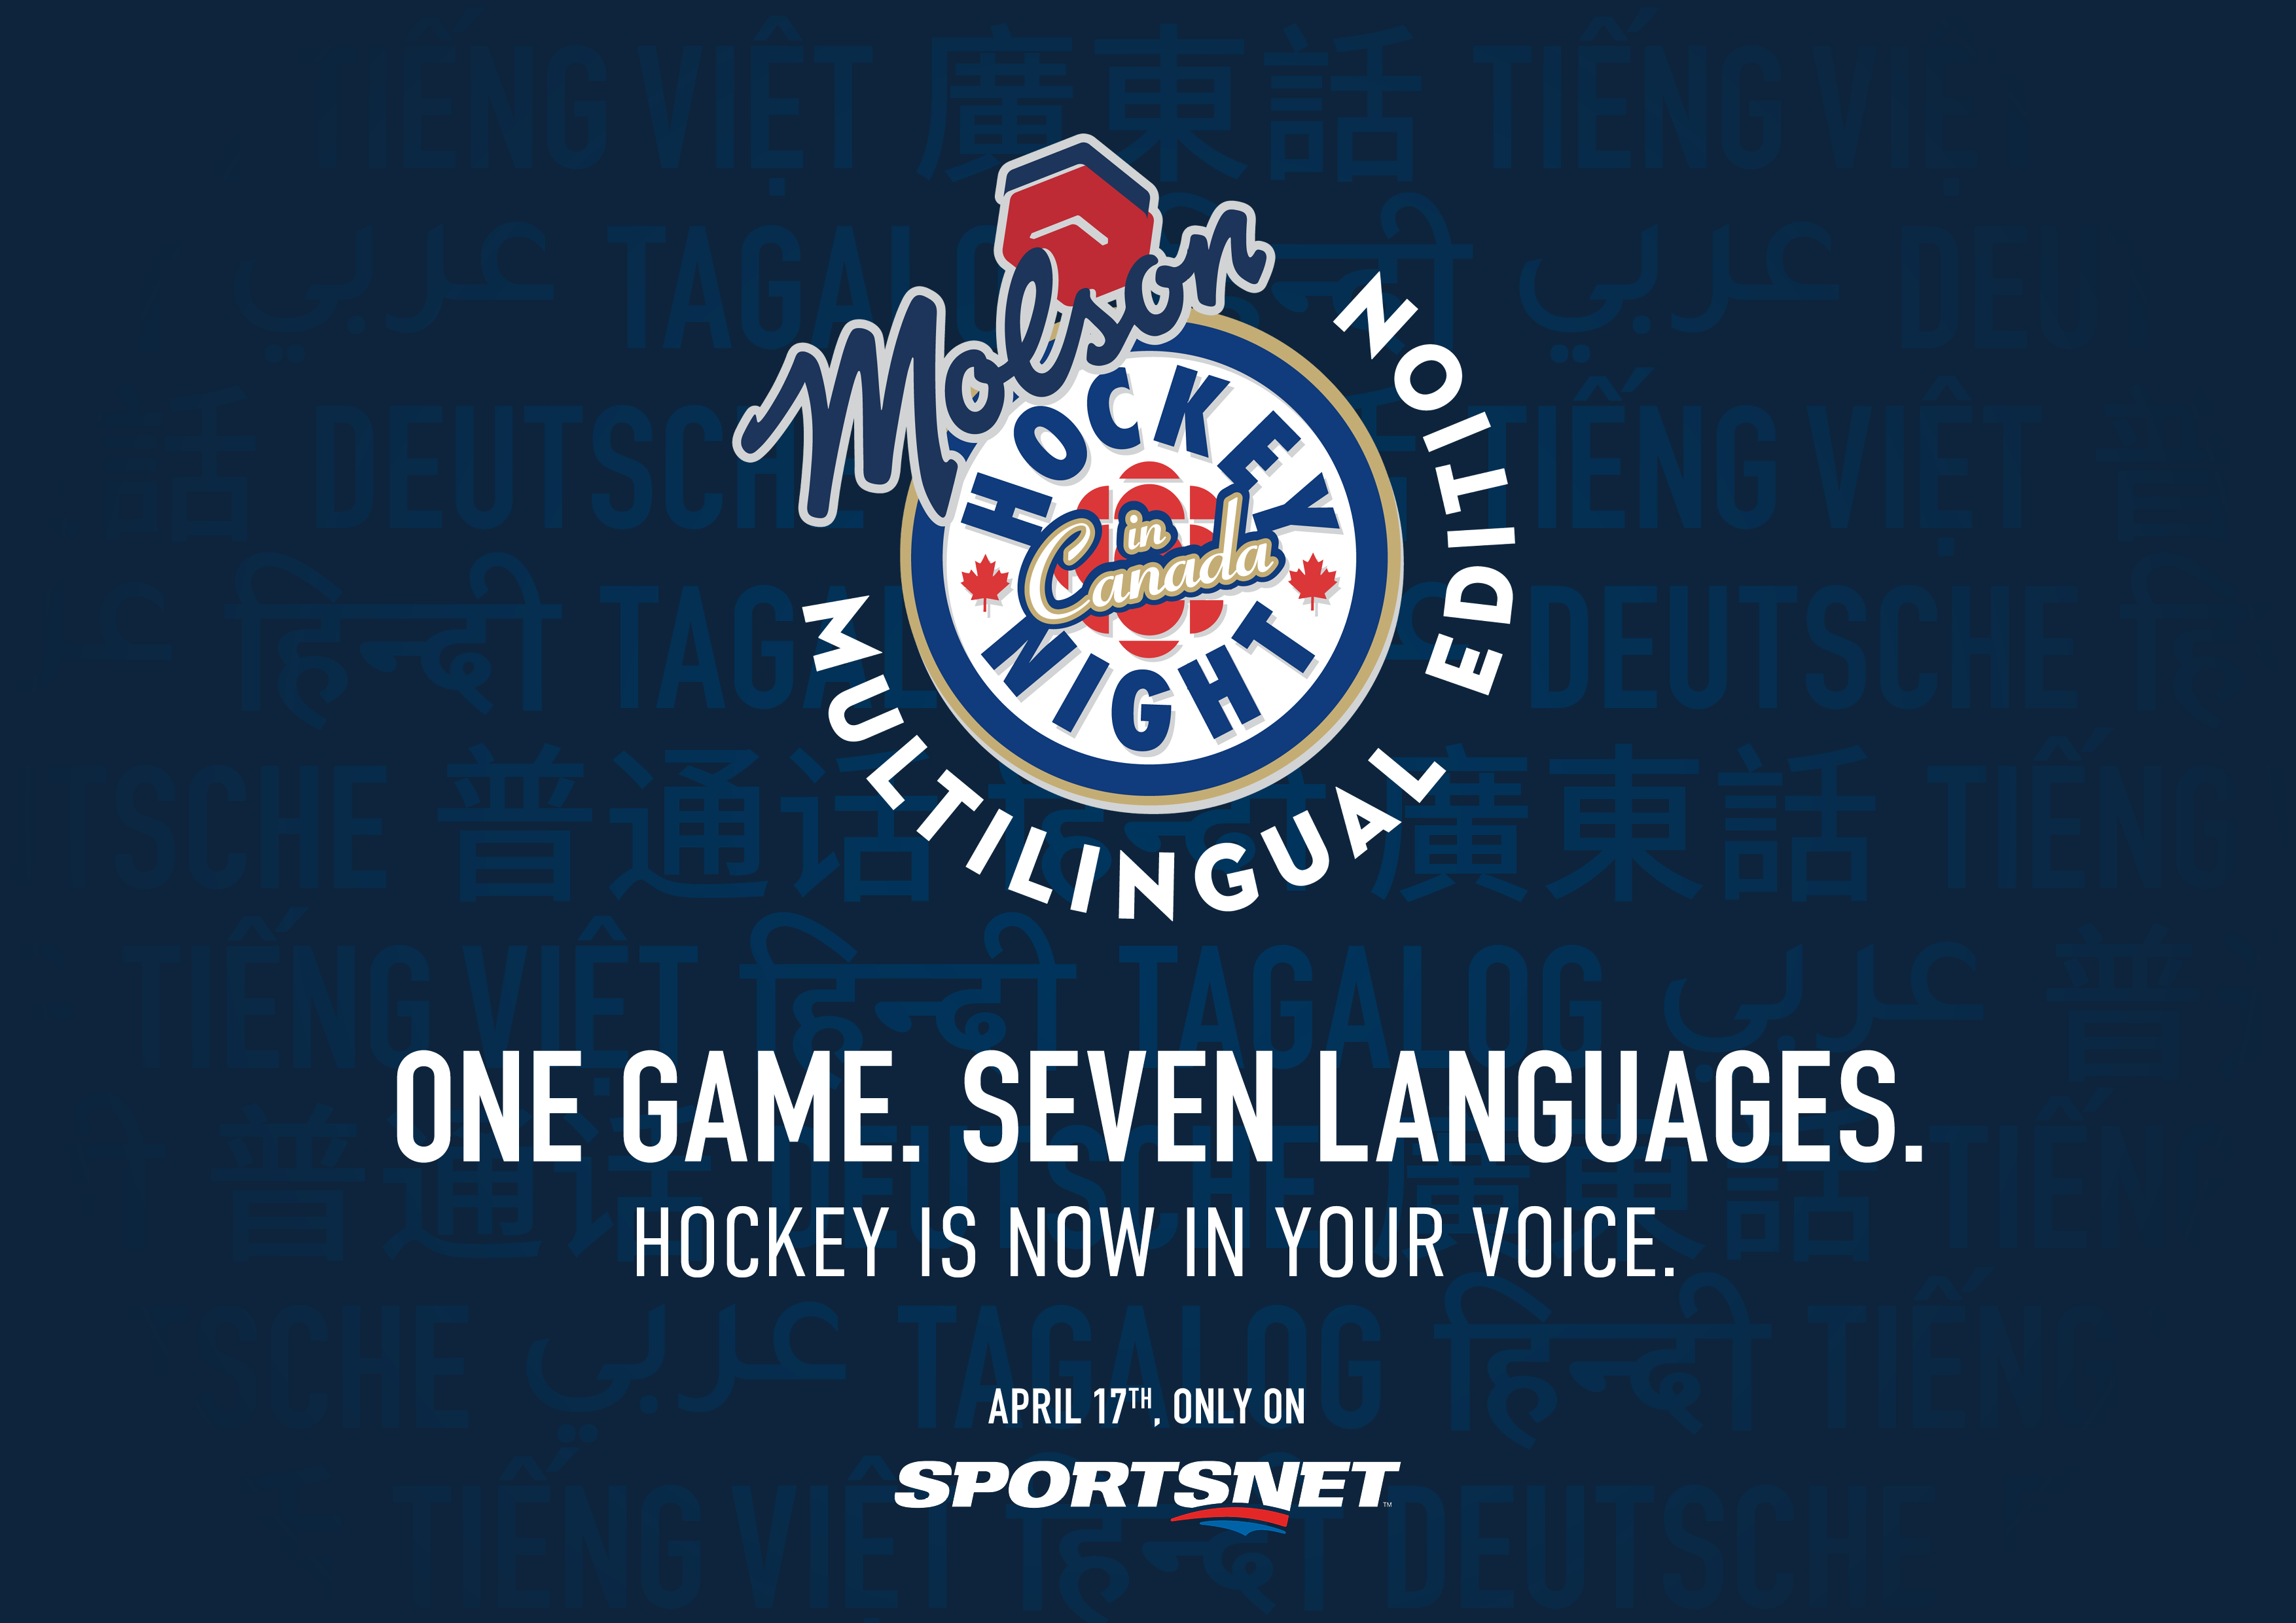 Molson Canadian to present Hockey Night in Canada in seven additional languages Molson Coors Beer and Beyond